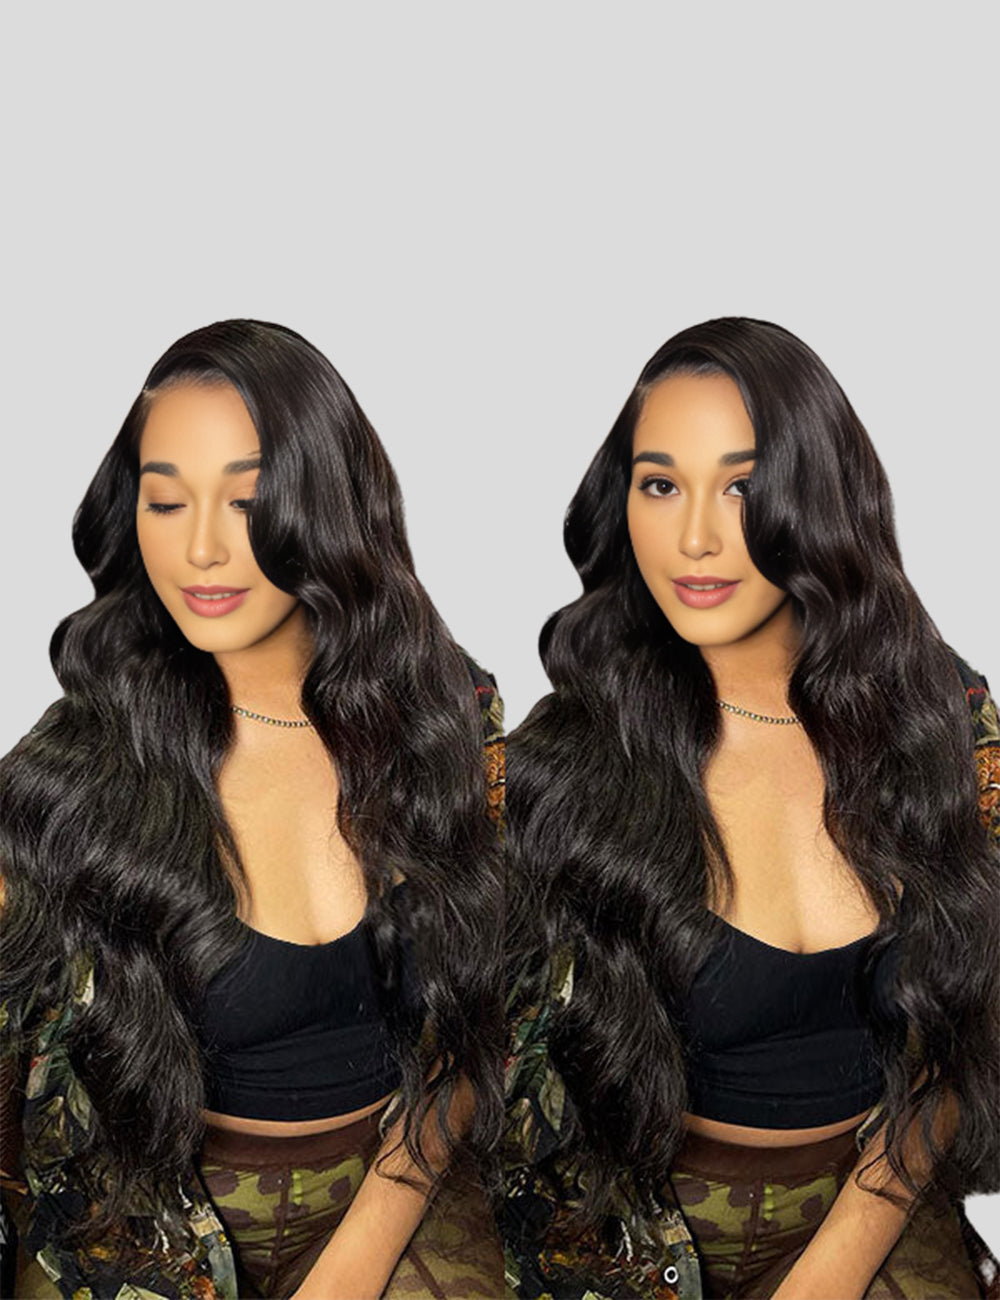 Body Wave Wig 4x4 Lace Closure Wig Malaysian HD Lace Wigs Pre Plucked Human Hair Wigs 250% Density